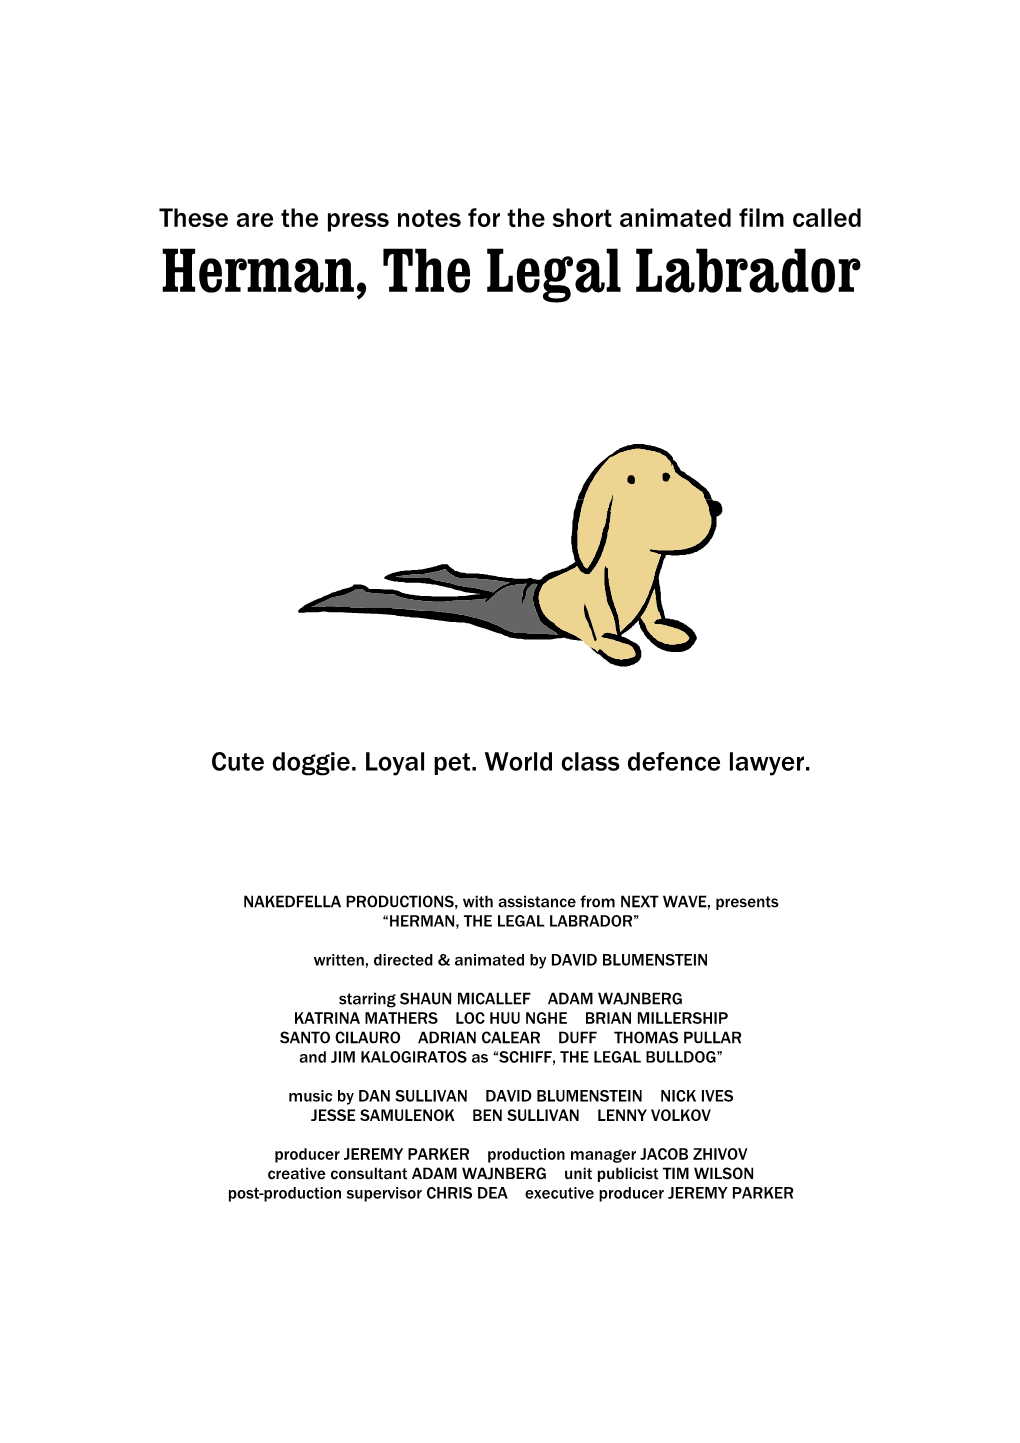 Press Notes for the Short Animated Film Called Herman, the Legal Labrador